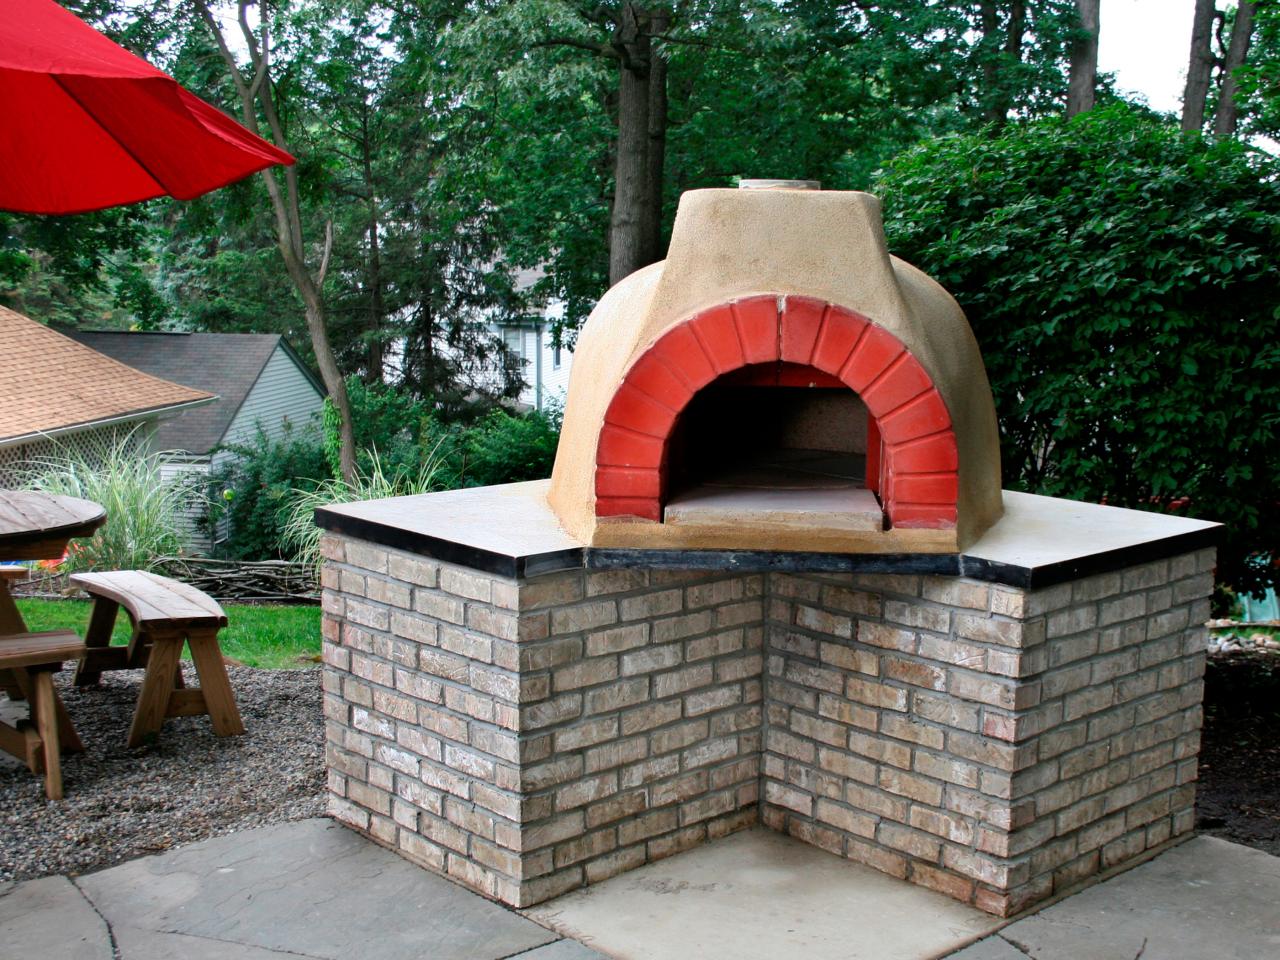 How To Build An Outdoor Pizza Oven, How To Build Outdoor Brick Oven Fireplace